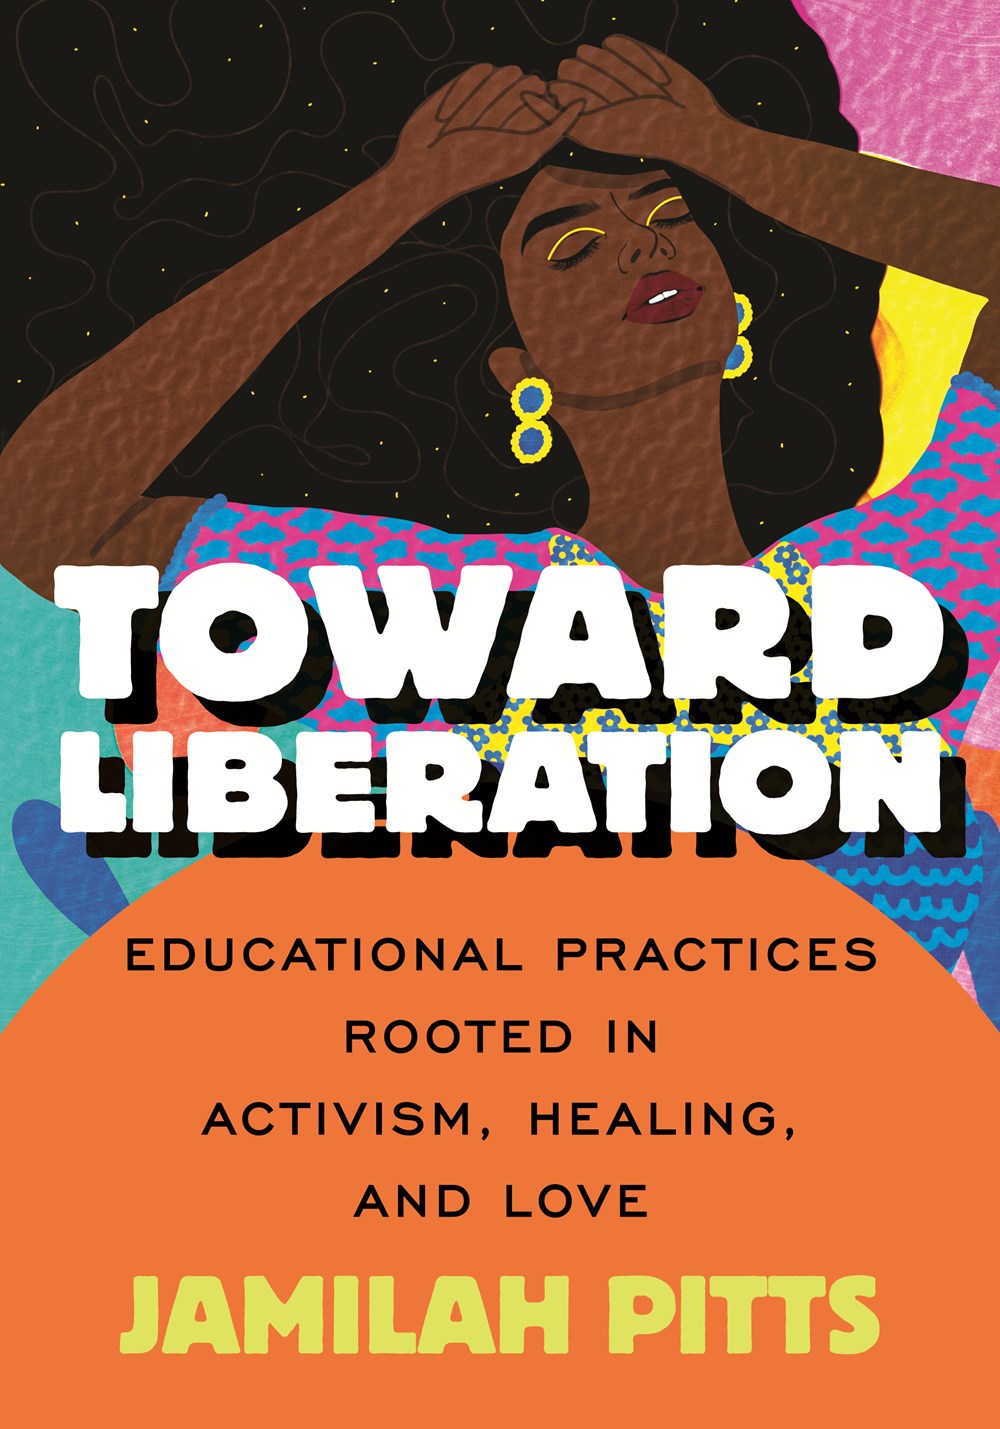 Toward Liberation: Educational Practices Rooted in Activism, Healing and Love